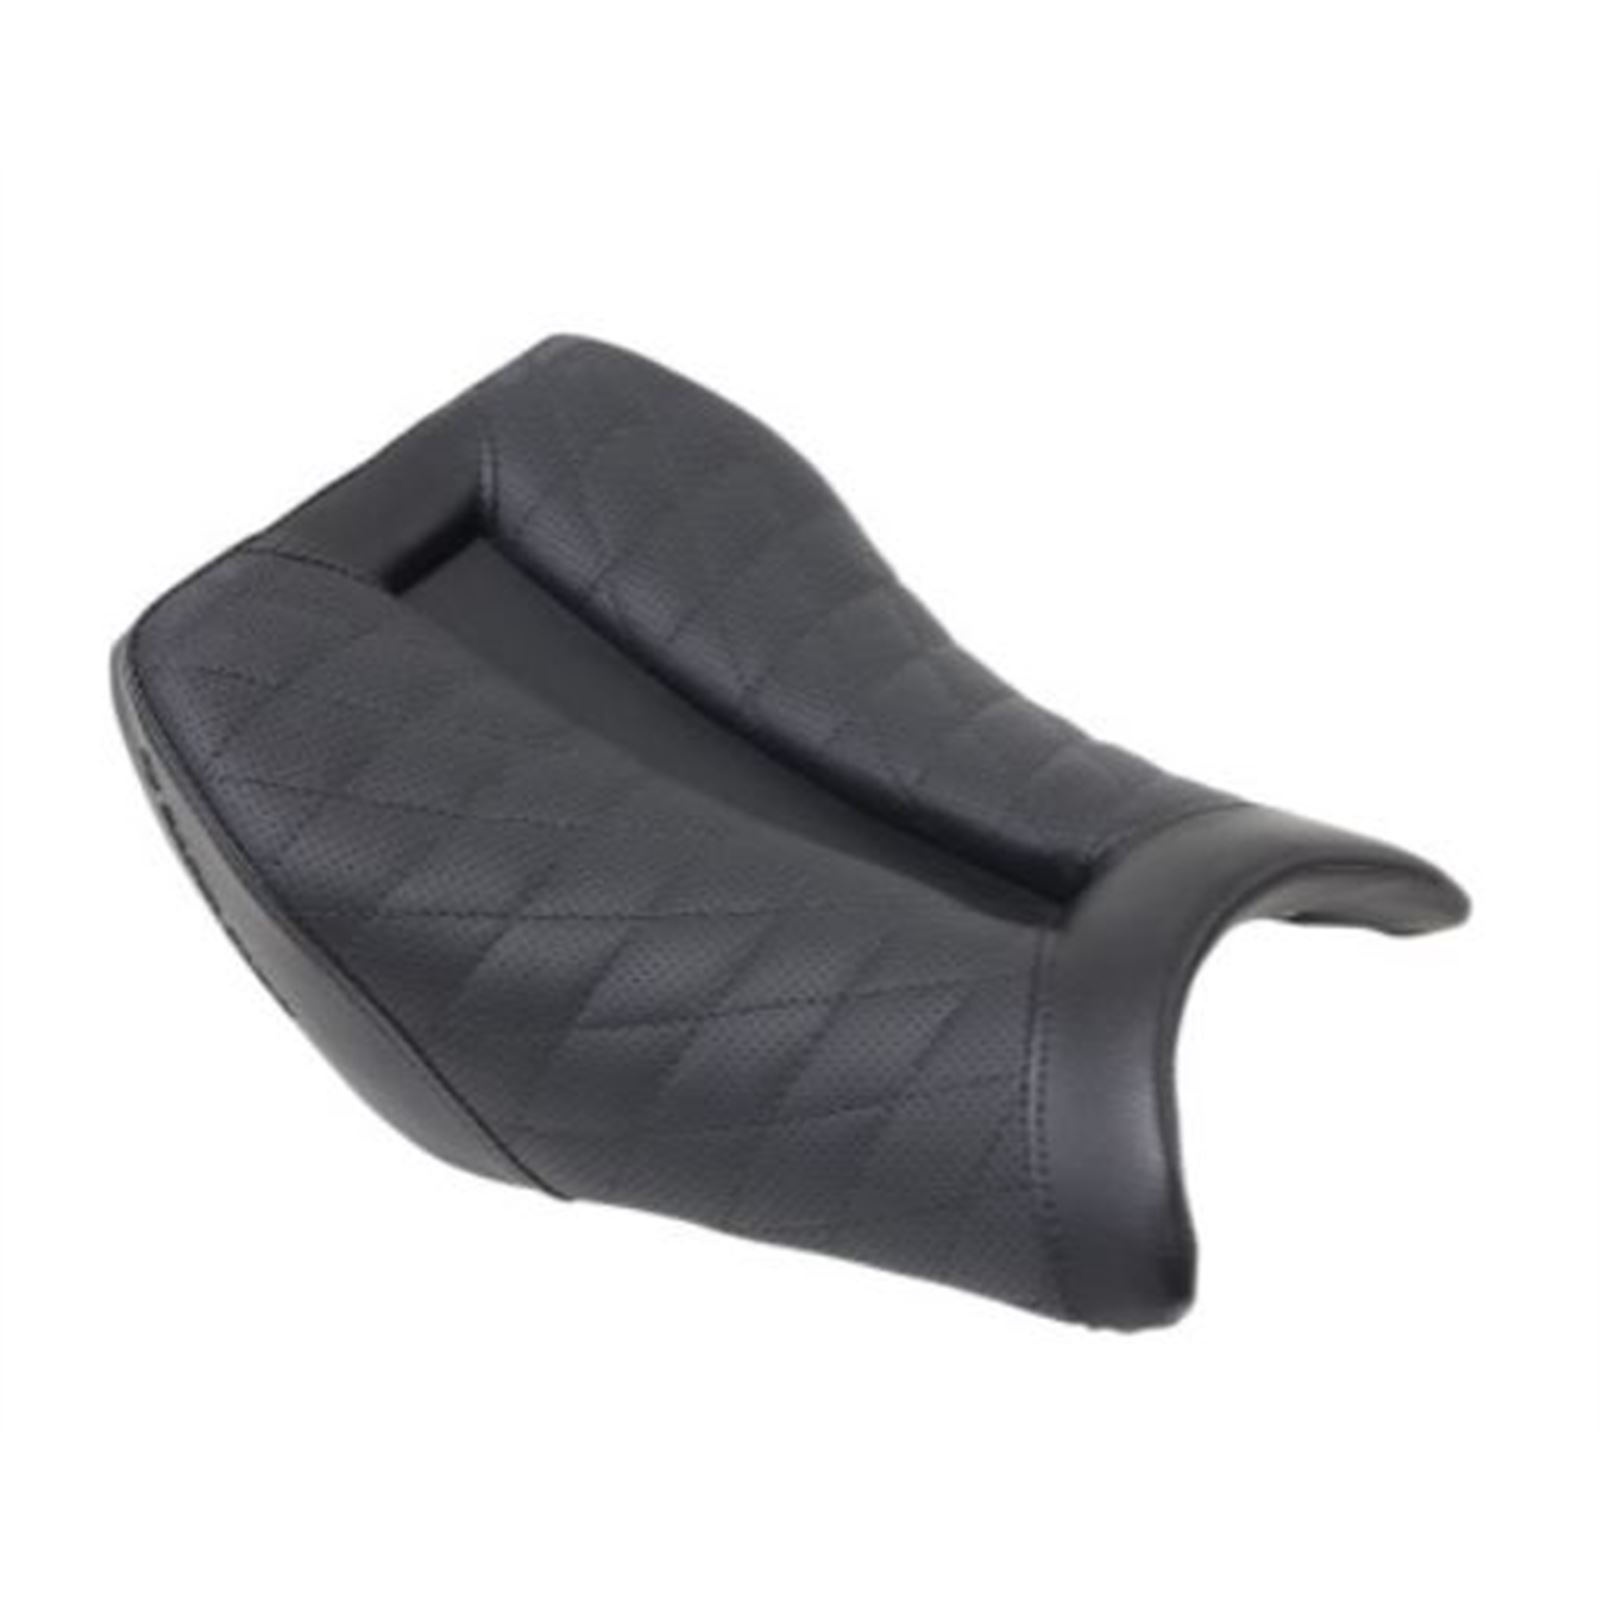 Saddlemen Track-LS Seat with Rear Cover